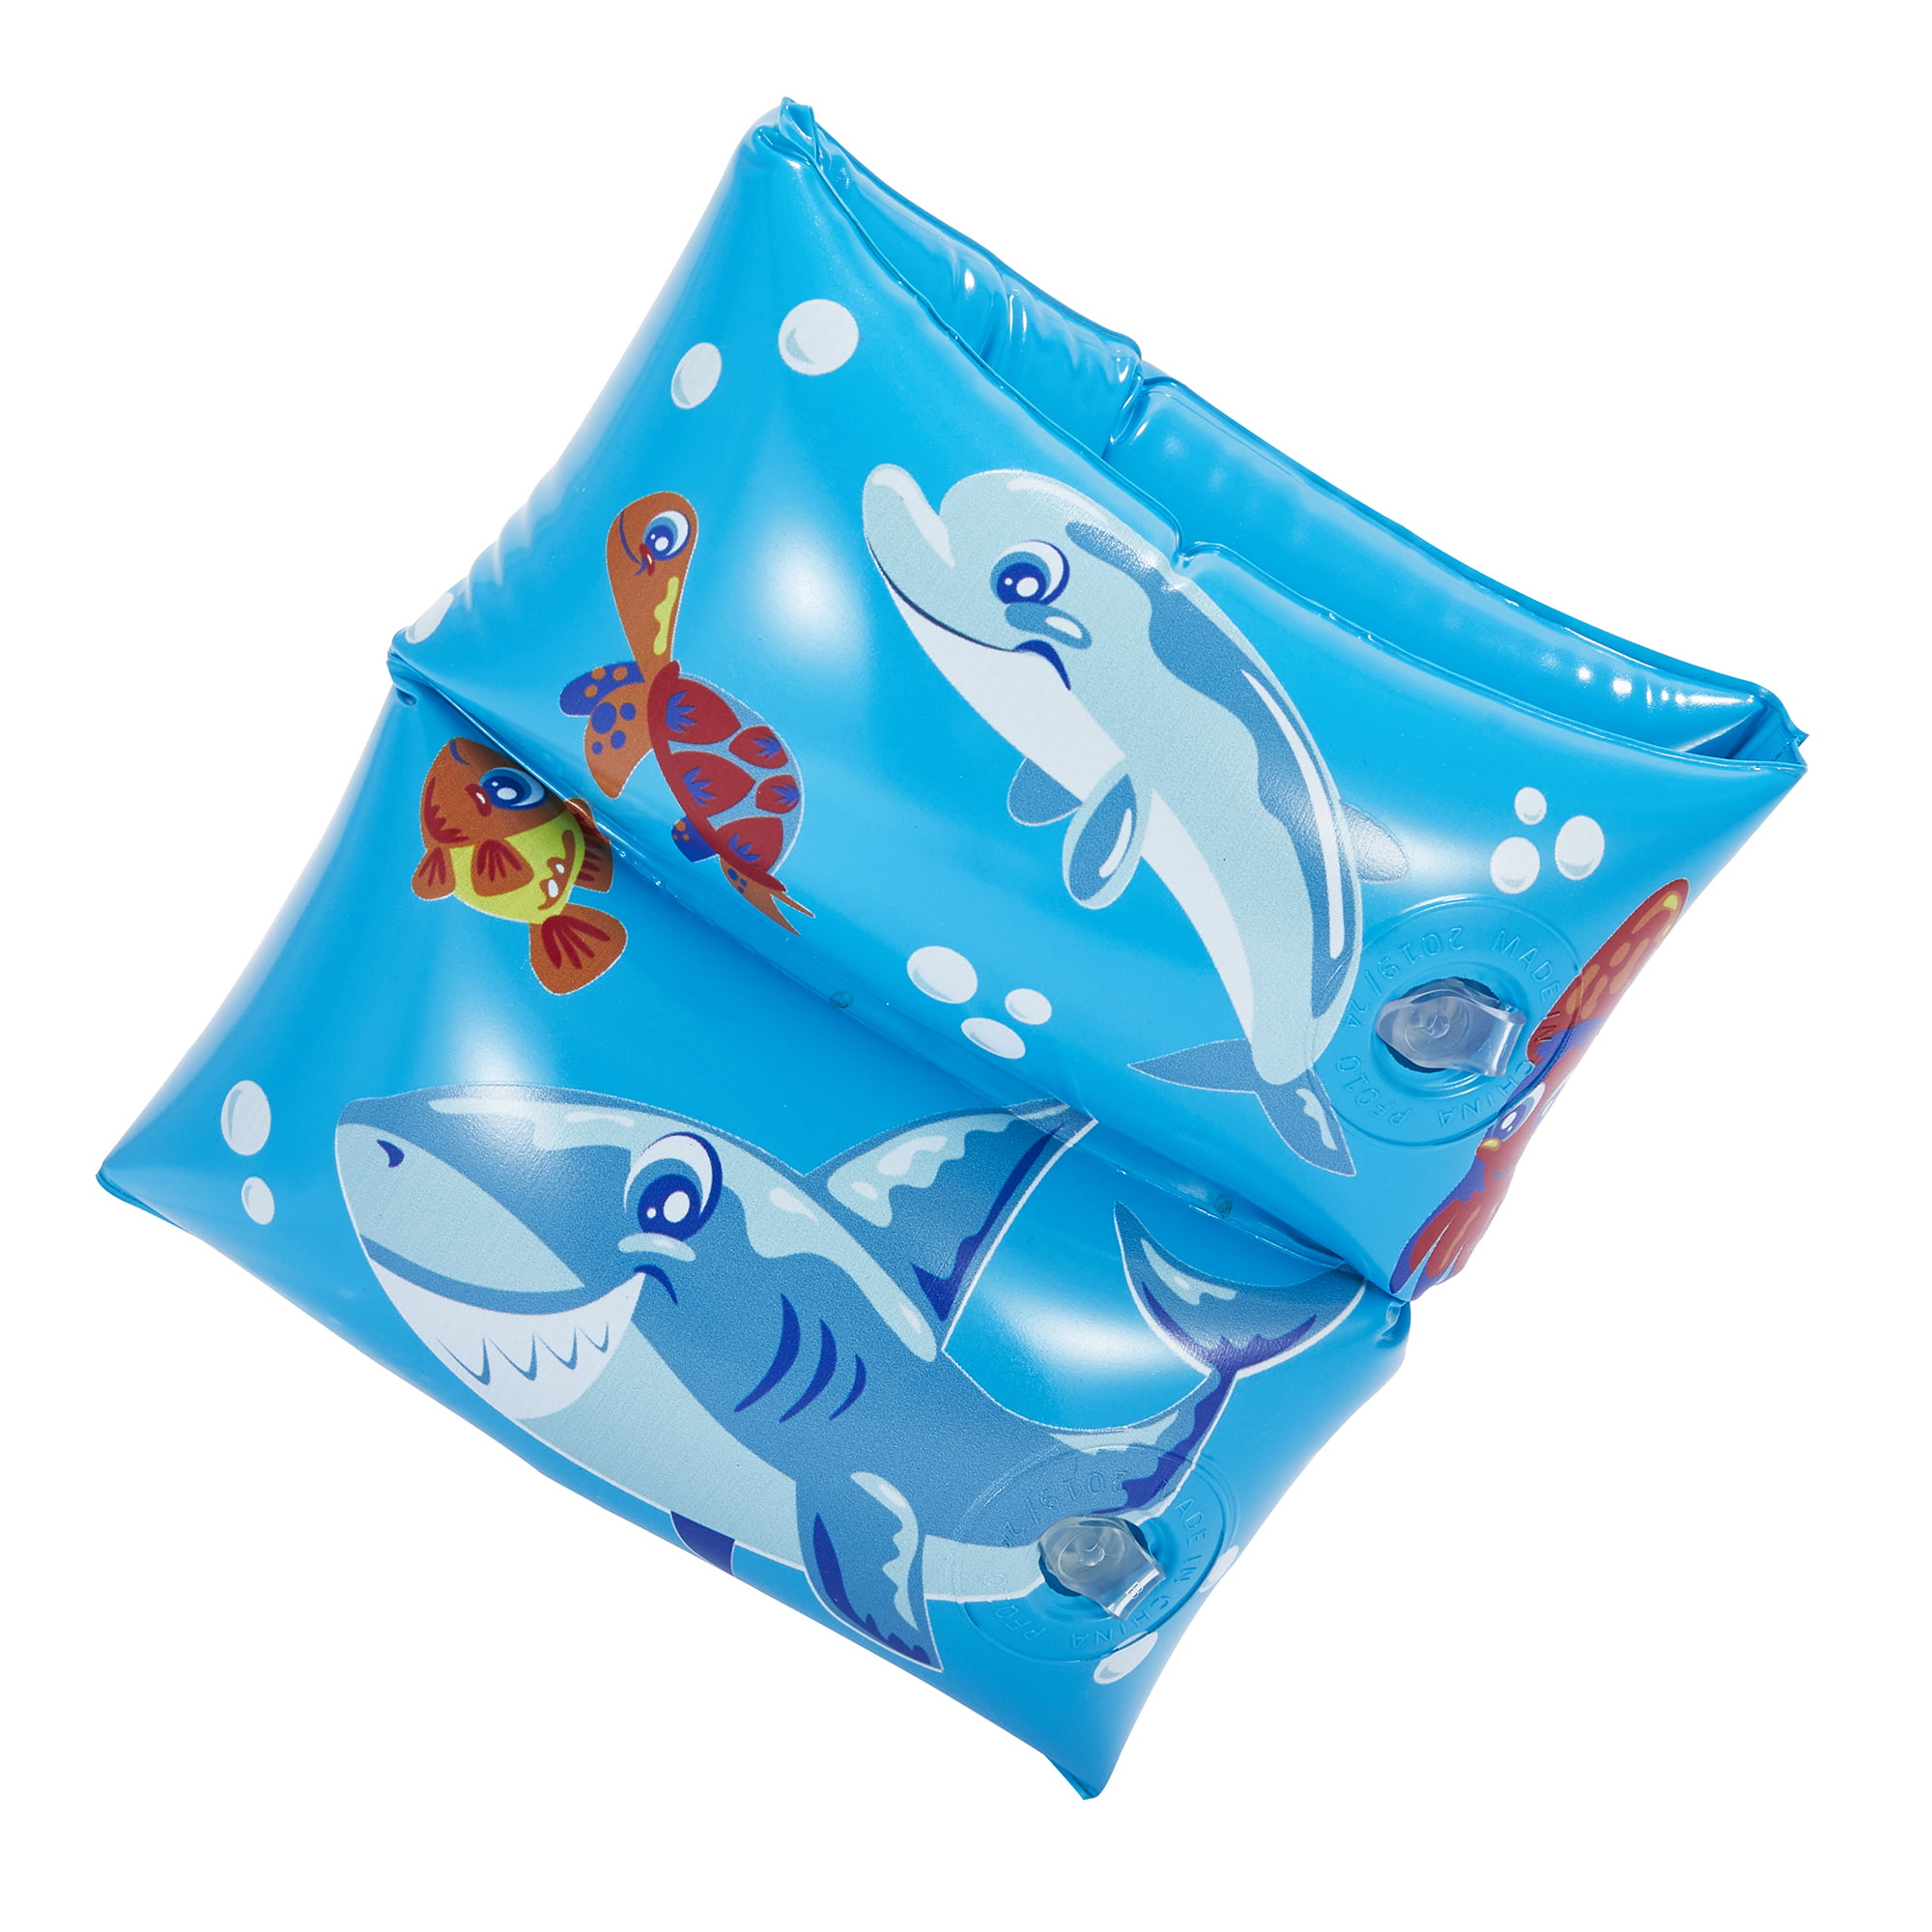 2 Play Day Inflatable Shark Printed Armbands in Blue Ages 3-6 1 Boys 1girls for sale online